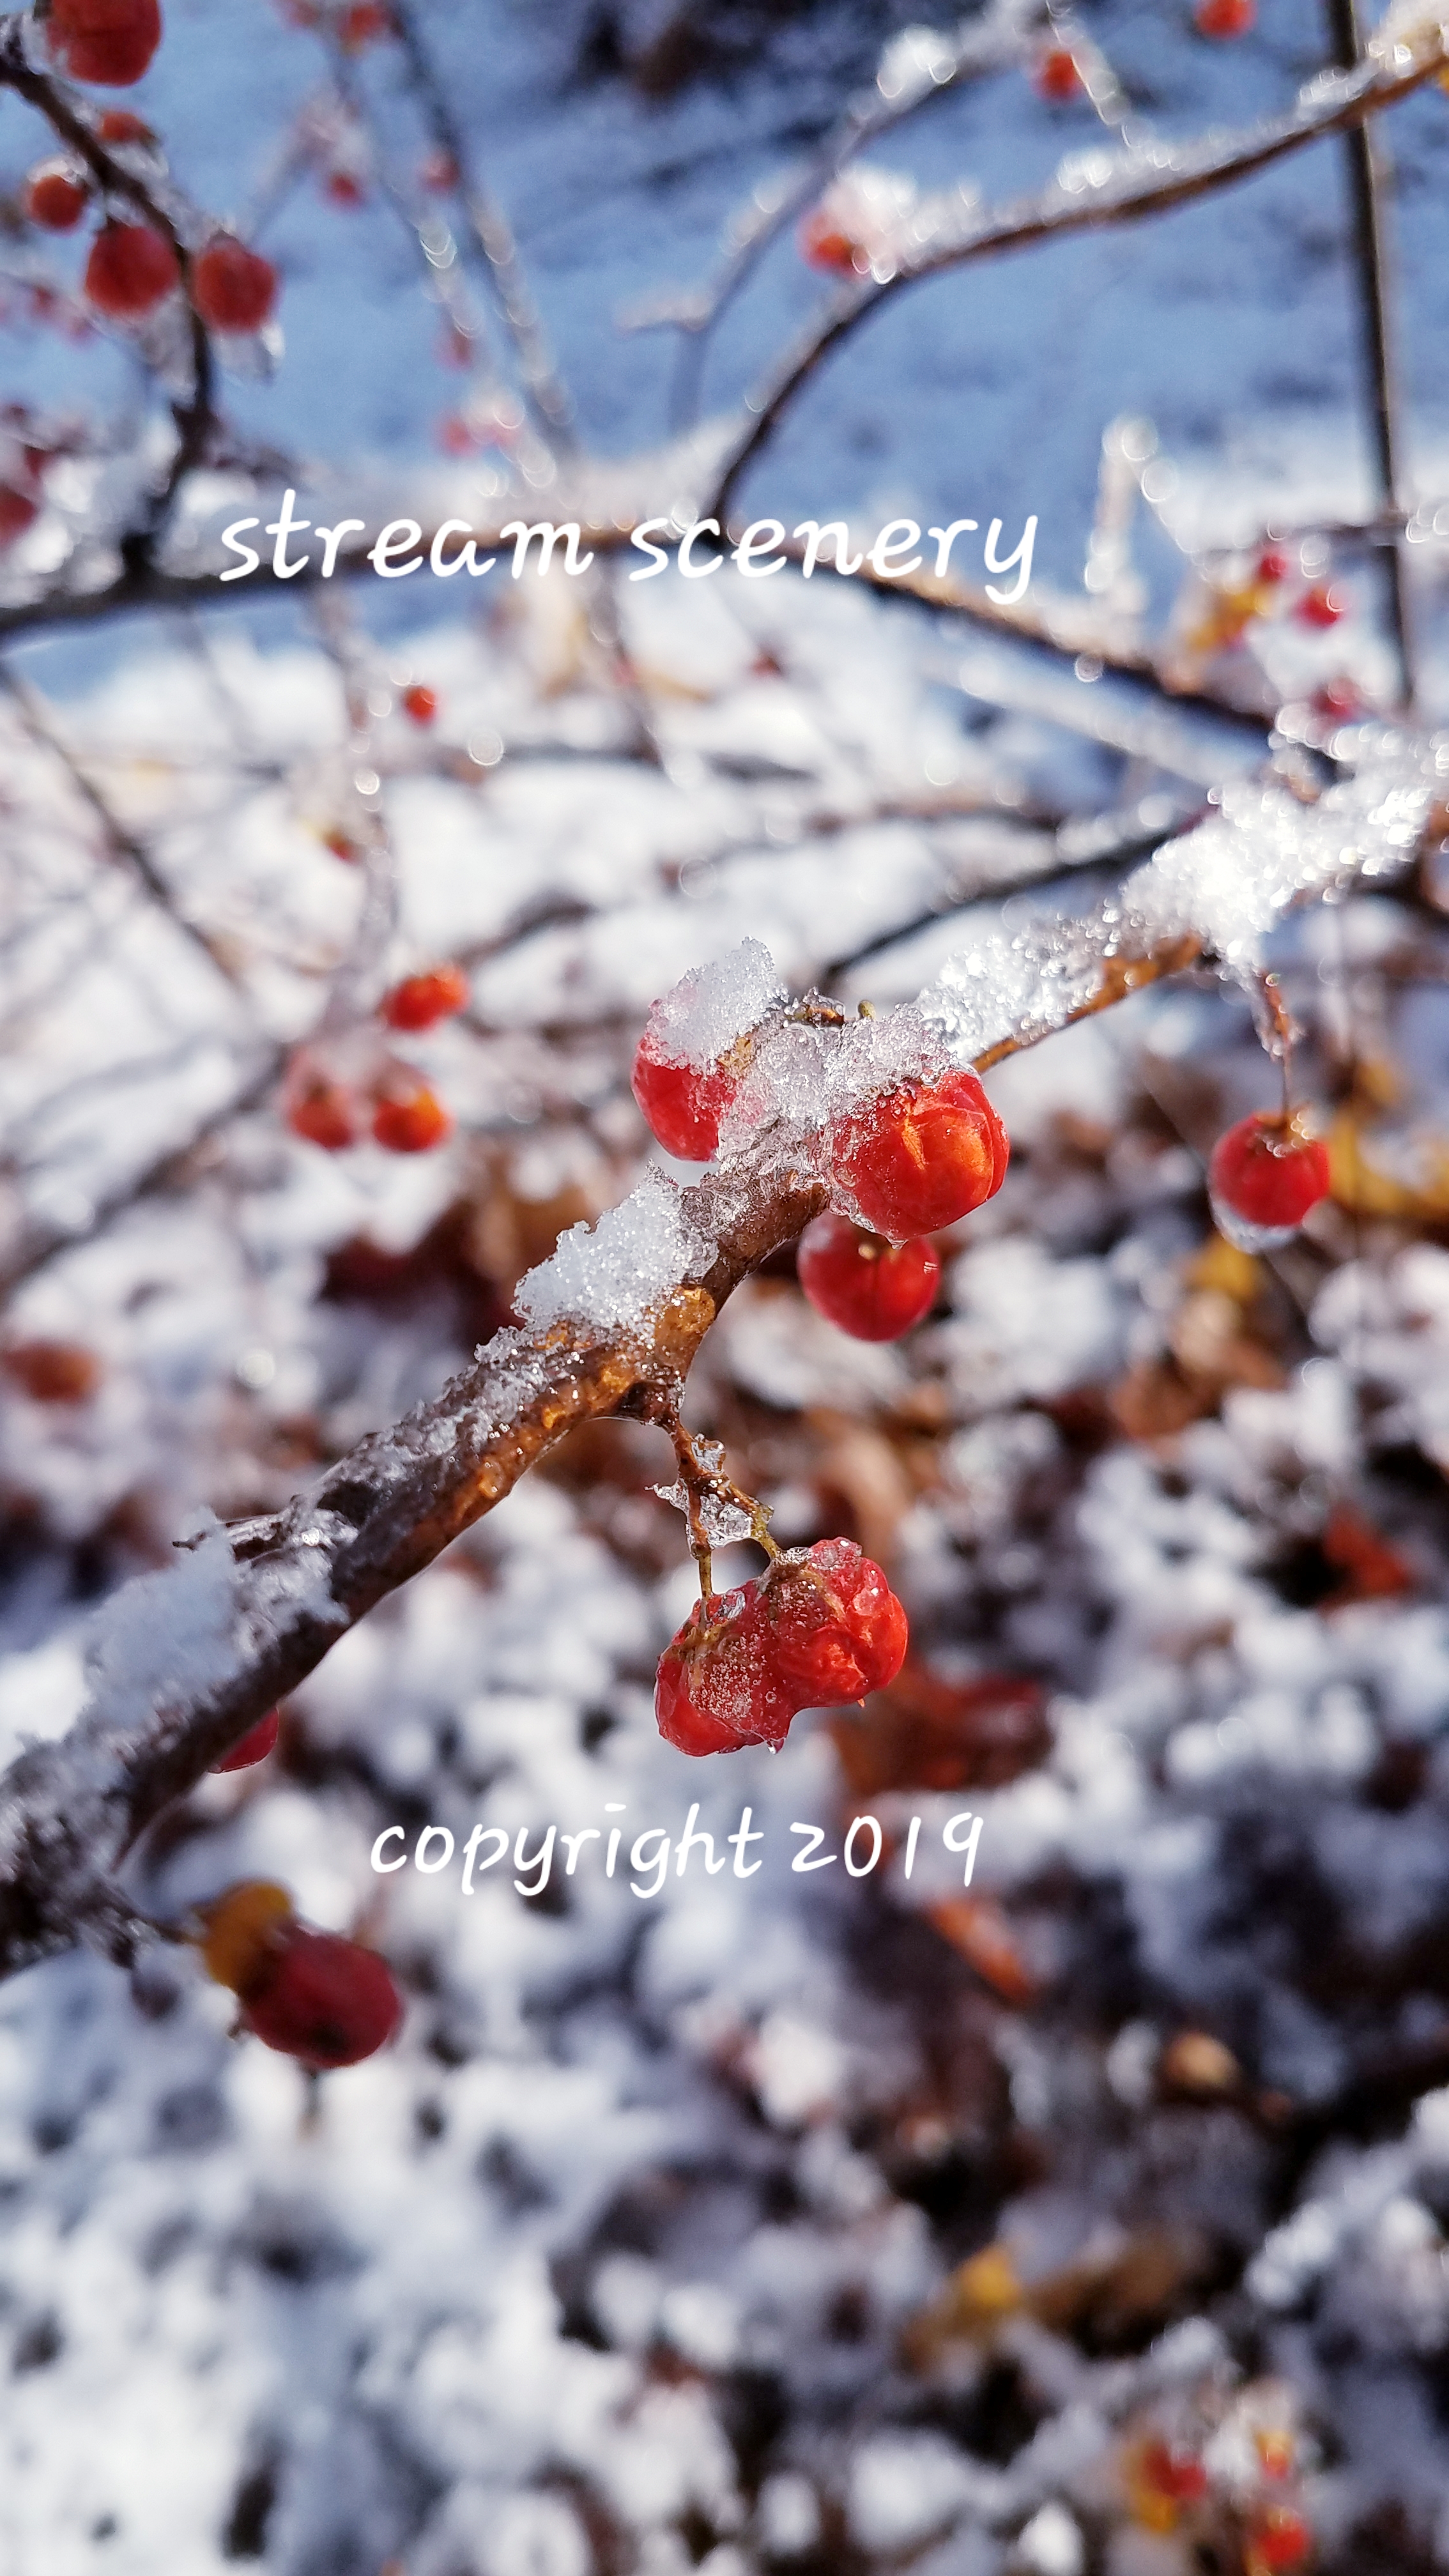 #WBERRY BERRY BUSH BY STREAM SCENERY WINTER NATURE PHOTOGRAPHY AND PRINTS